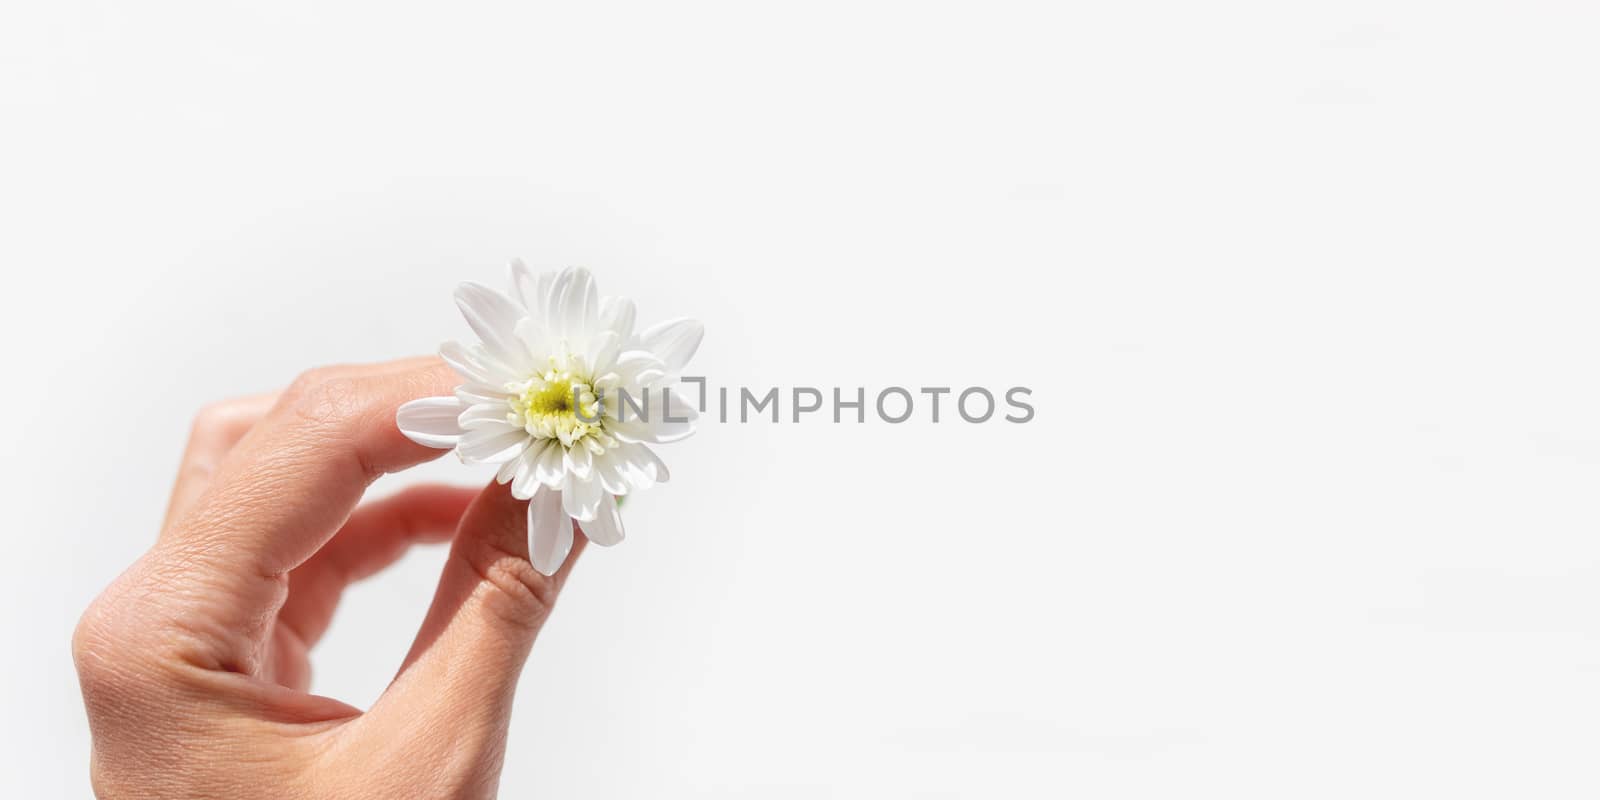 Top view on hand with chrysanthemum flower. Flat lay background with copy space.